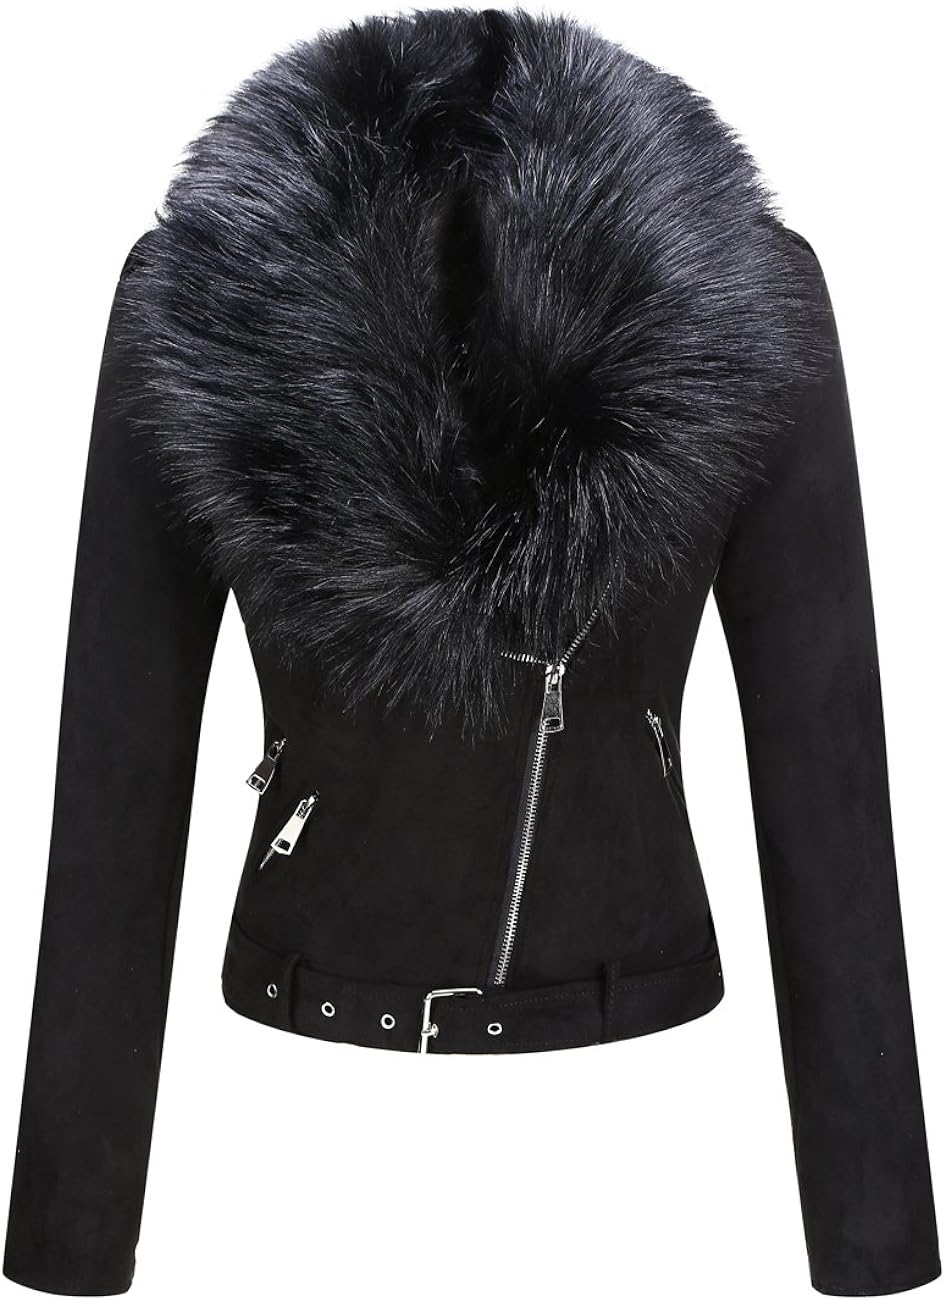 Buy Bellivera Womens Faux Suede Leather Jacket, Fall and Winter Fashion Motorcycle  Biker Coat with Detachable Fur Collar Online in Pakistan. B08112GPMC